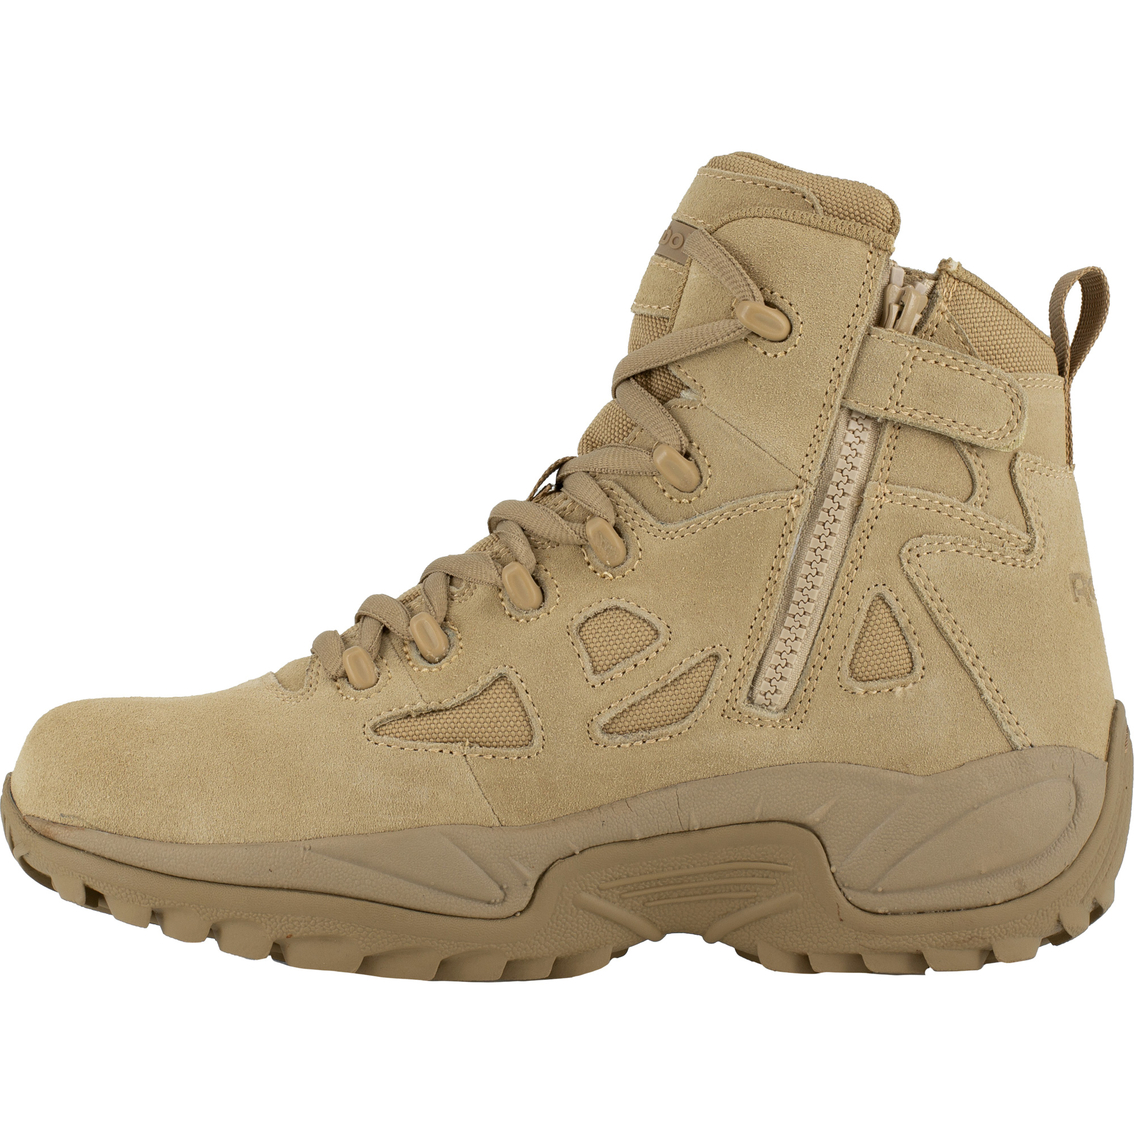 Reebok Rapid Response 6 in. Stealth Boots - Image 4 of 5